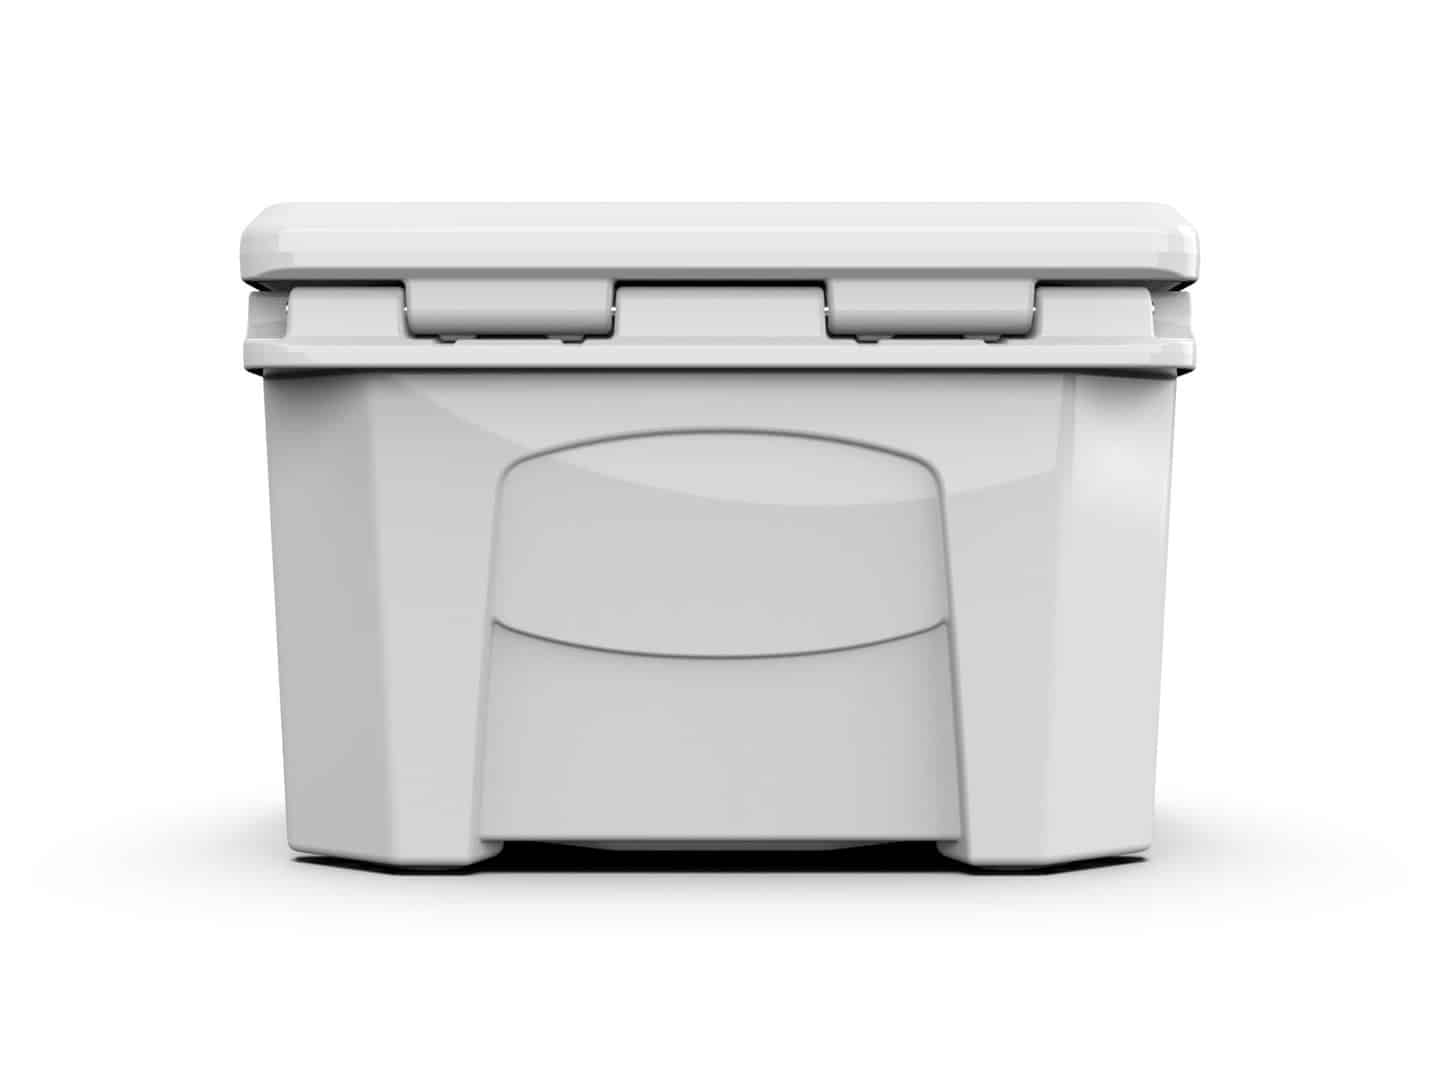 Grizzly 20 White Hard Cooler